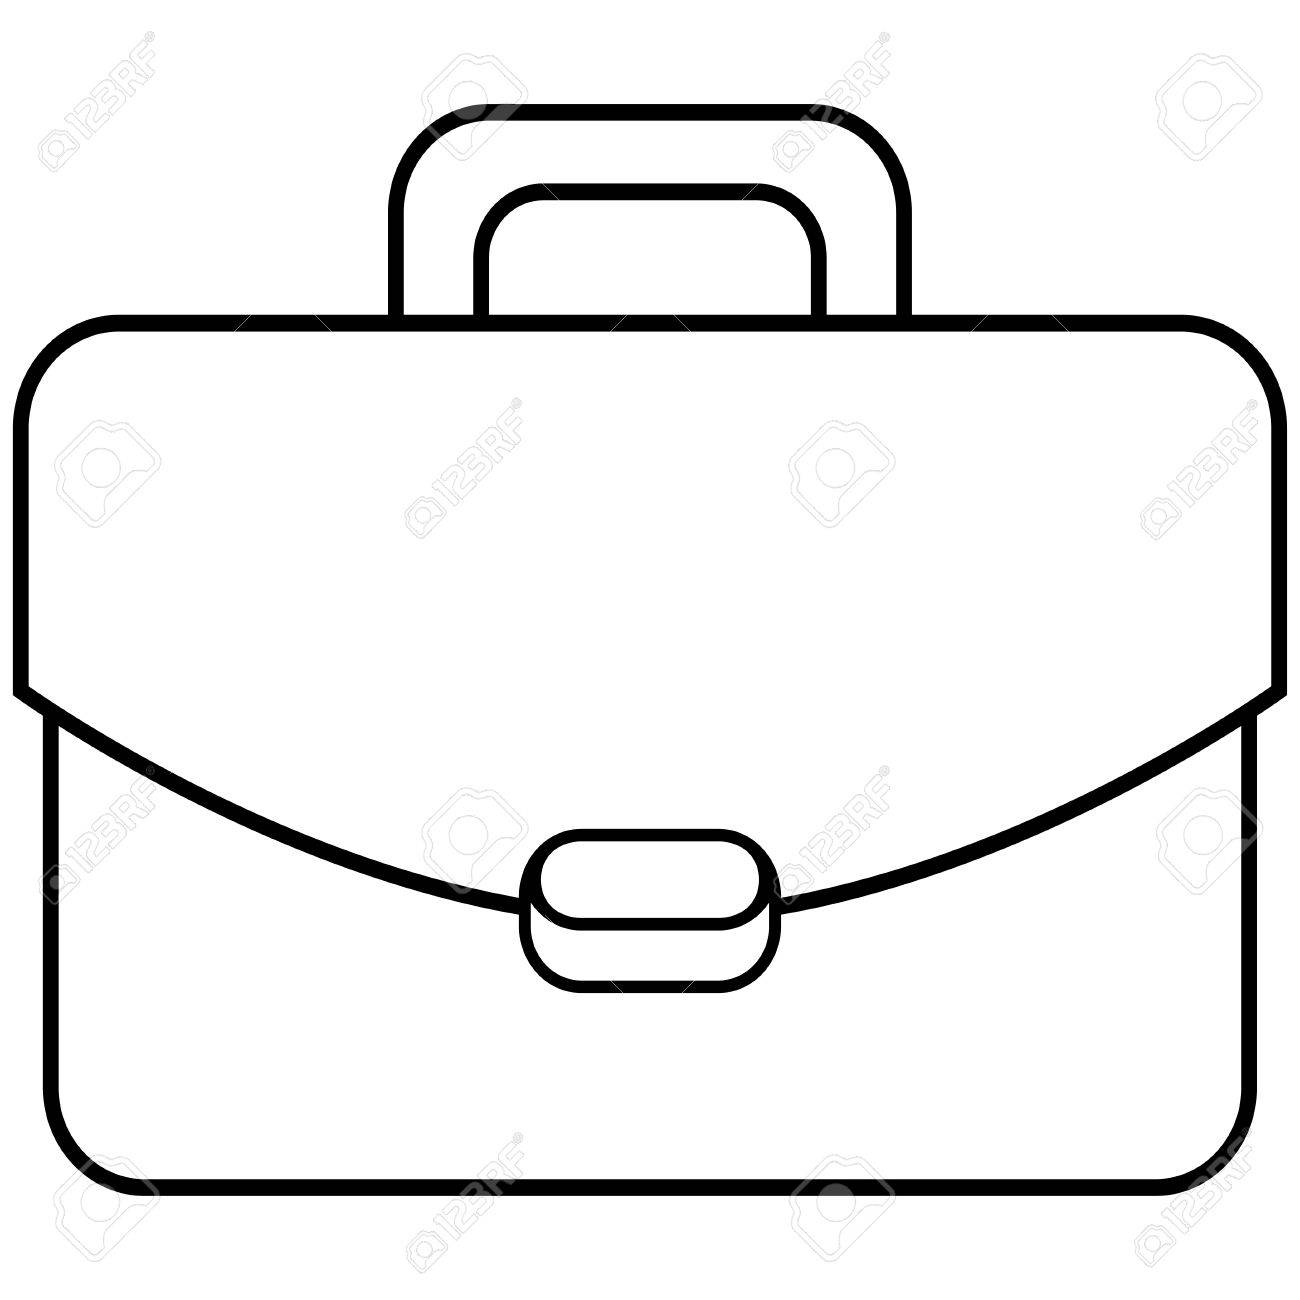 Suitcase black and white icon isolated